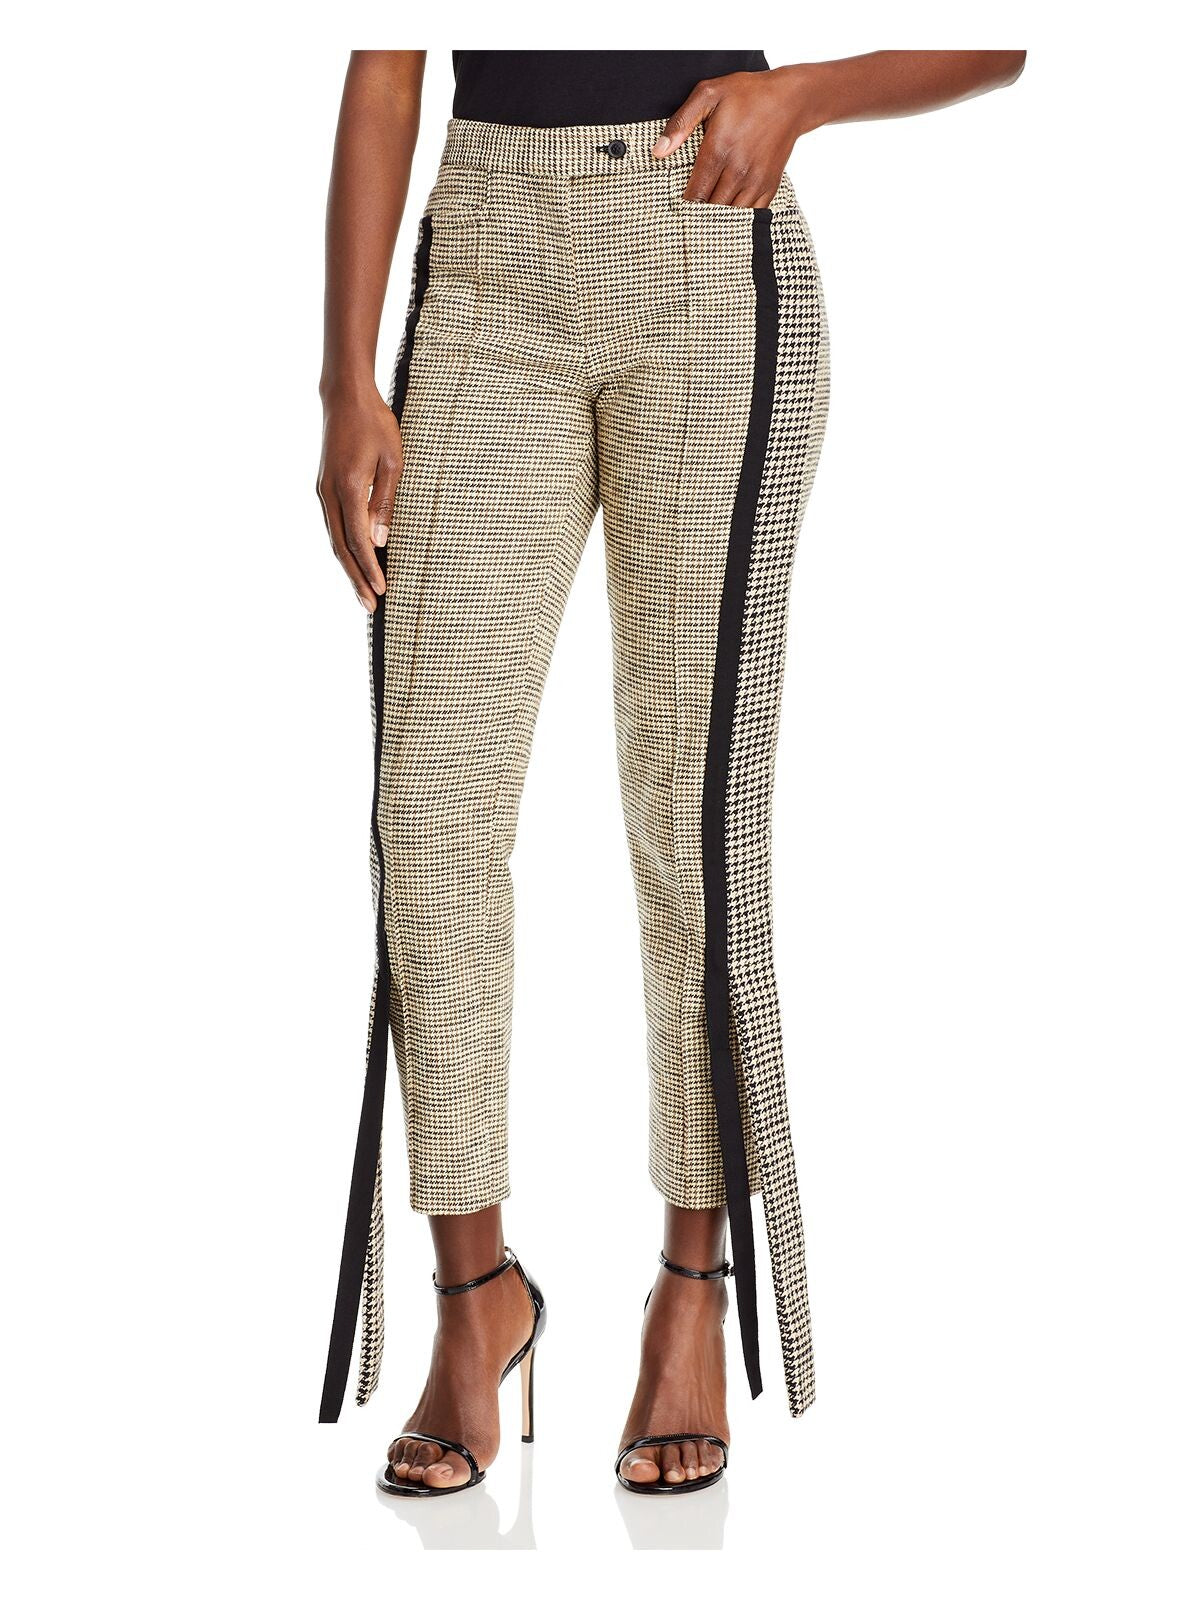 HELLESSY Womens Beige Pocketed Zippered Hook And Bar Closure Tailored Houndstooth Cropped Pants 12